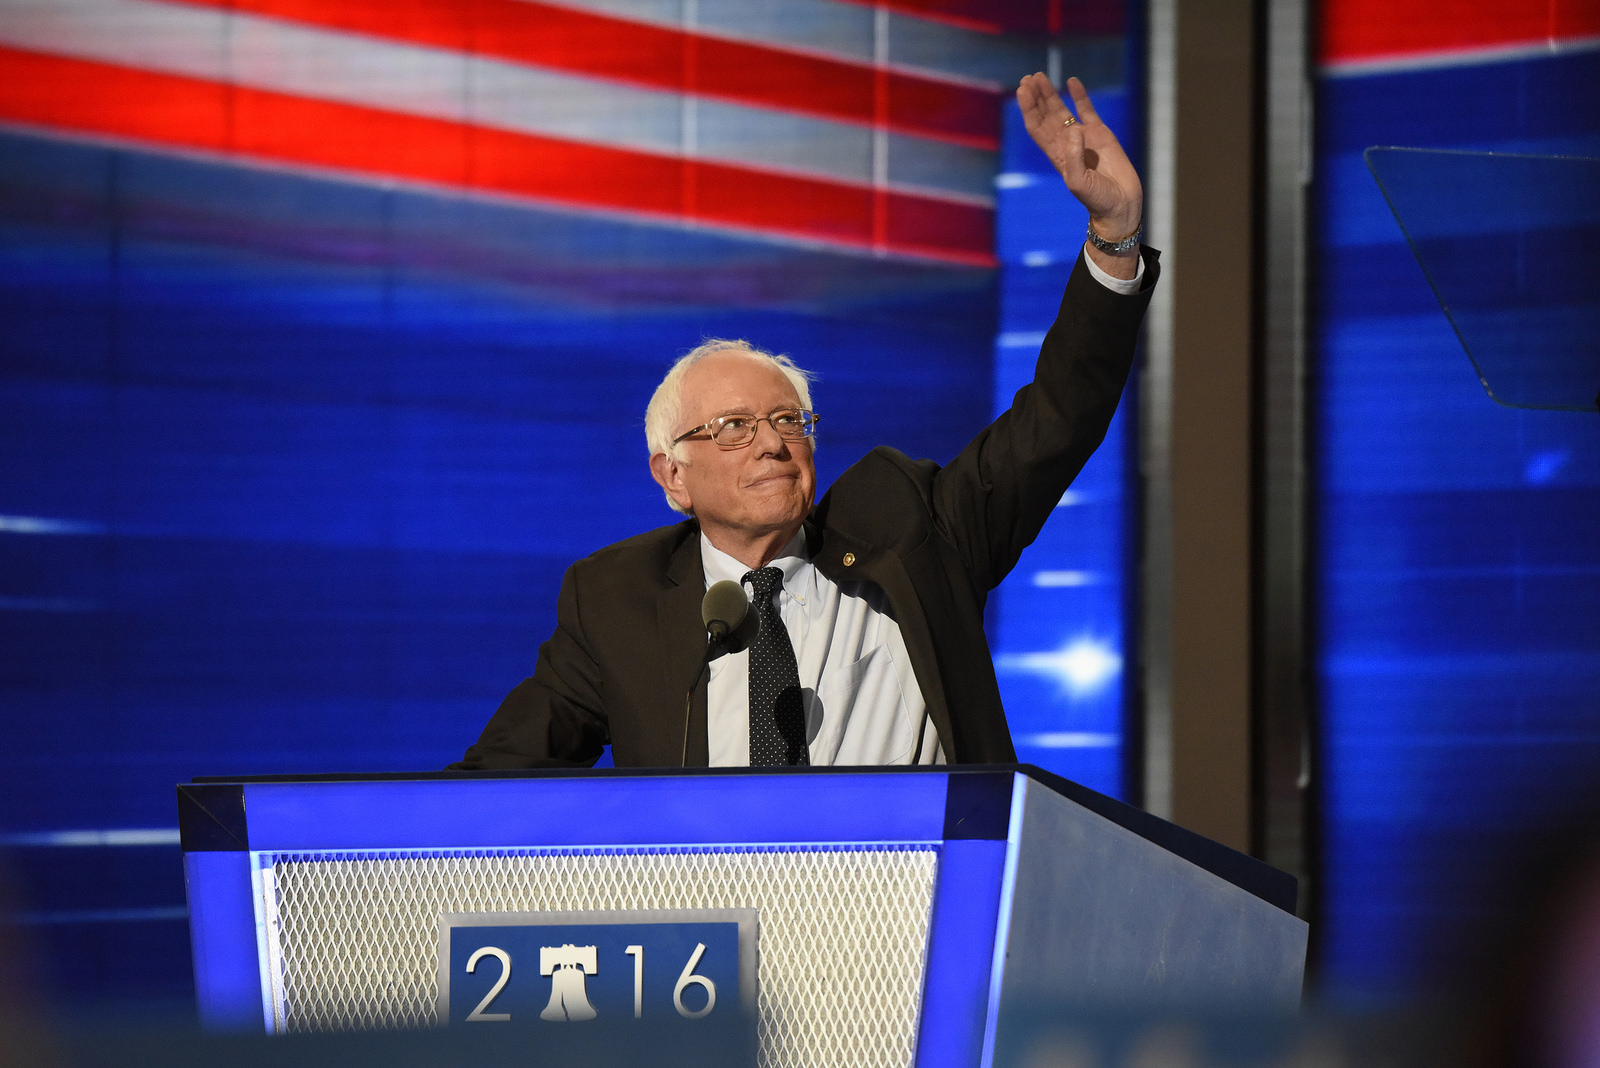 Bernie Sanders at the 2016 Democratic National Convention.